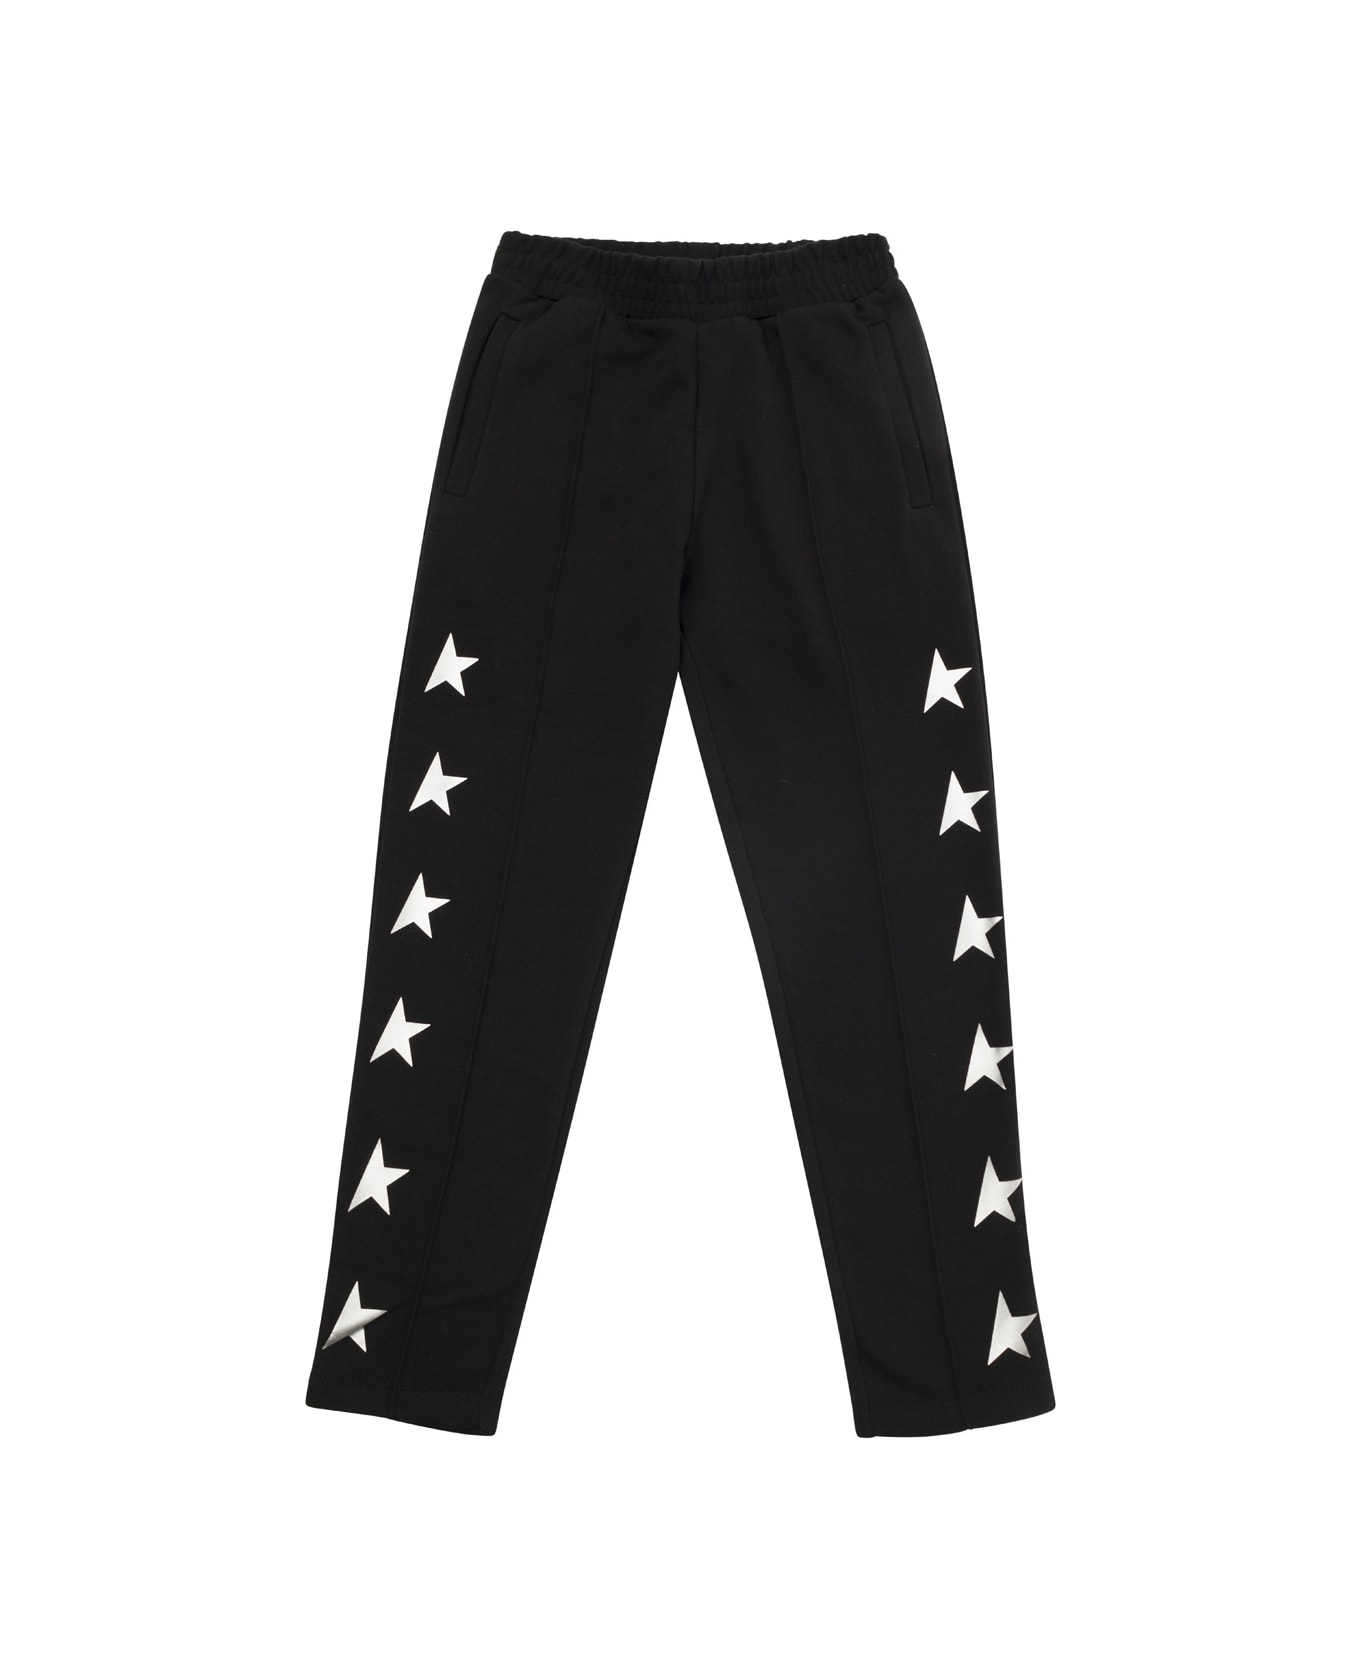 Golden Goose Star / Boy's Jogging Pants Tapared Leg / Multistar Printed Include Cod Gyp - Black ボトムス